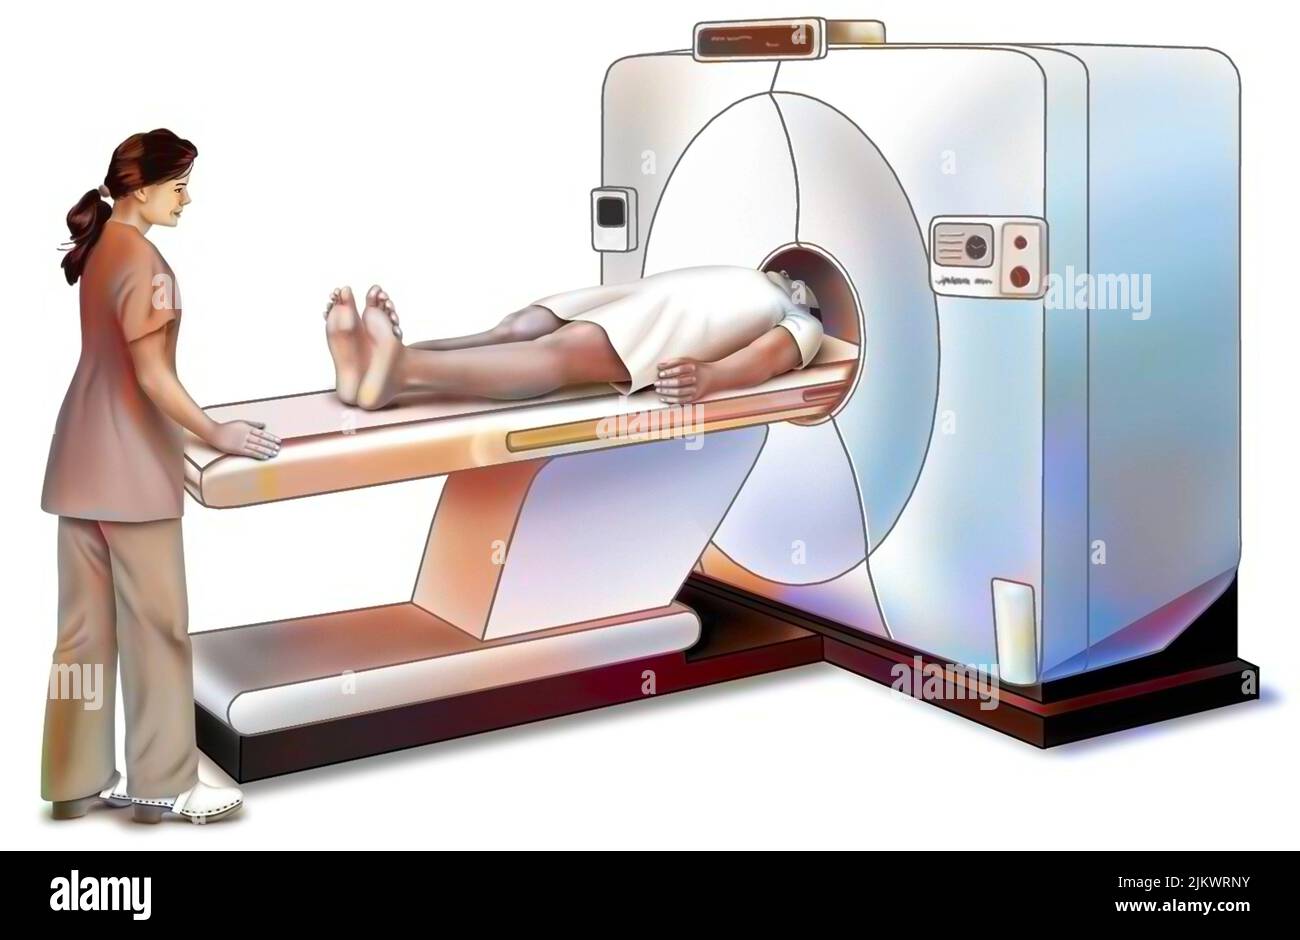 Pet scan: medical imaging device to detect tumors and metastases. Stock Photo